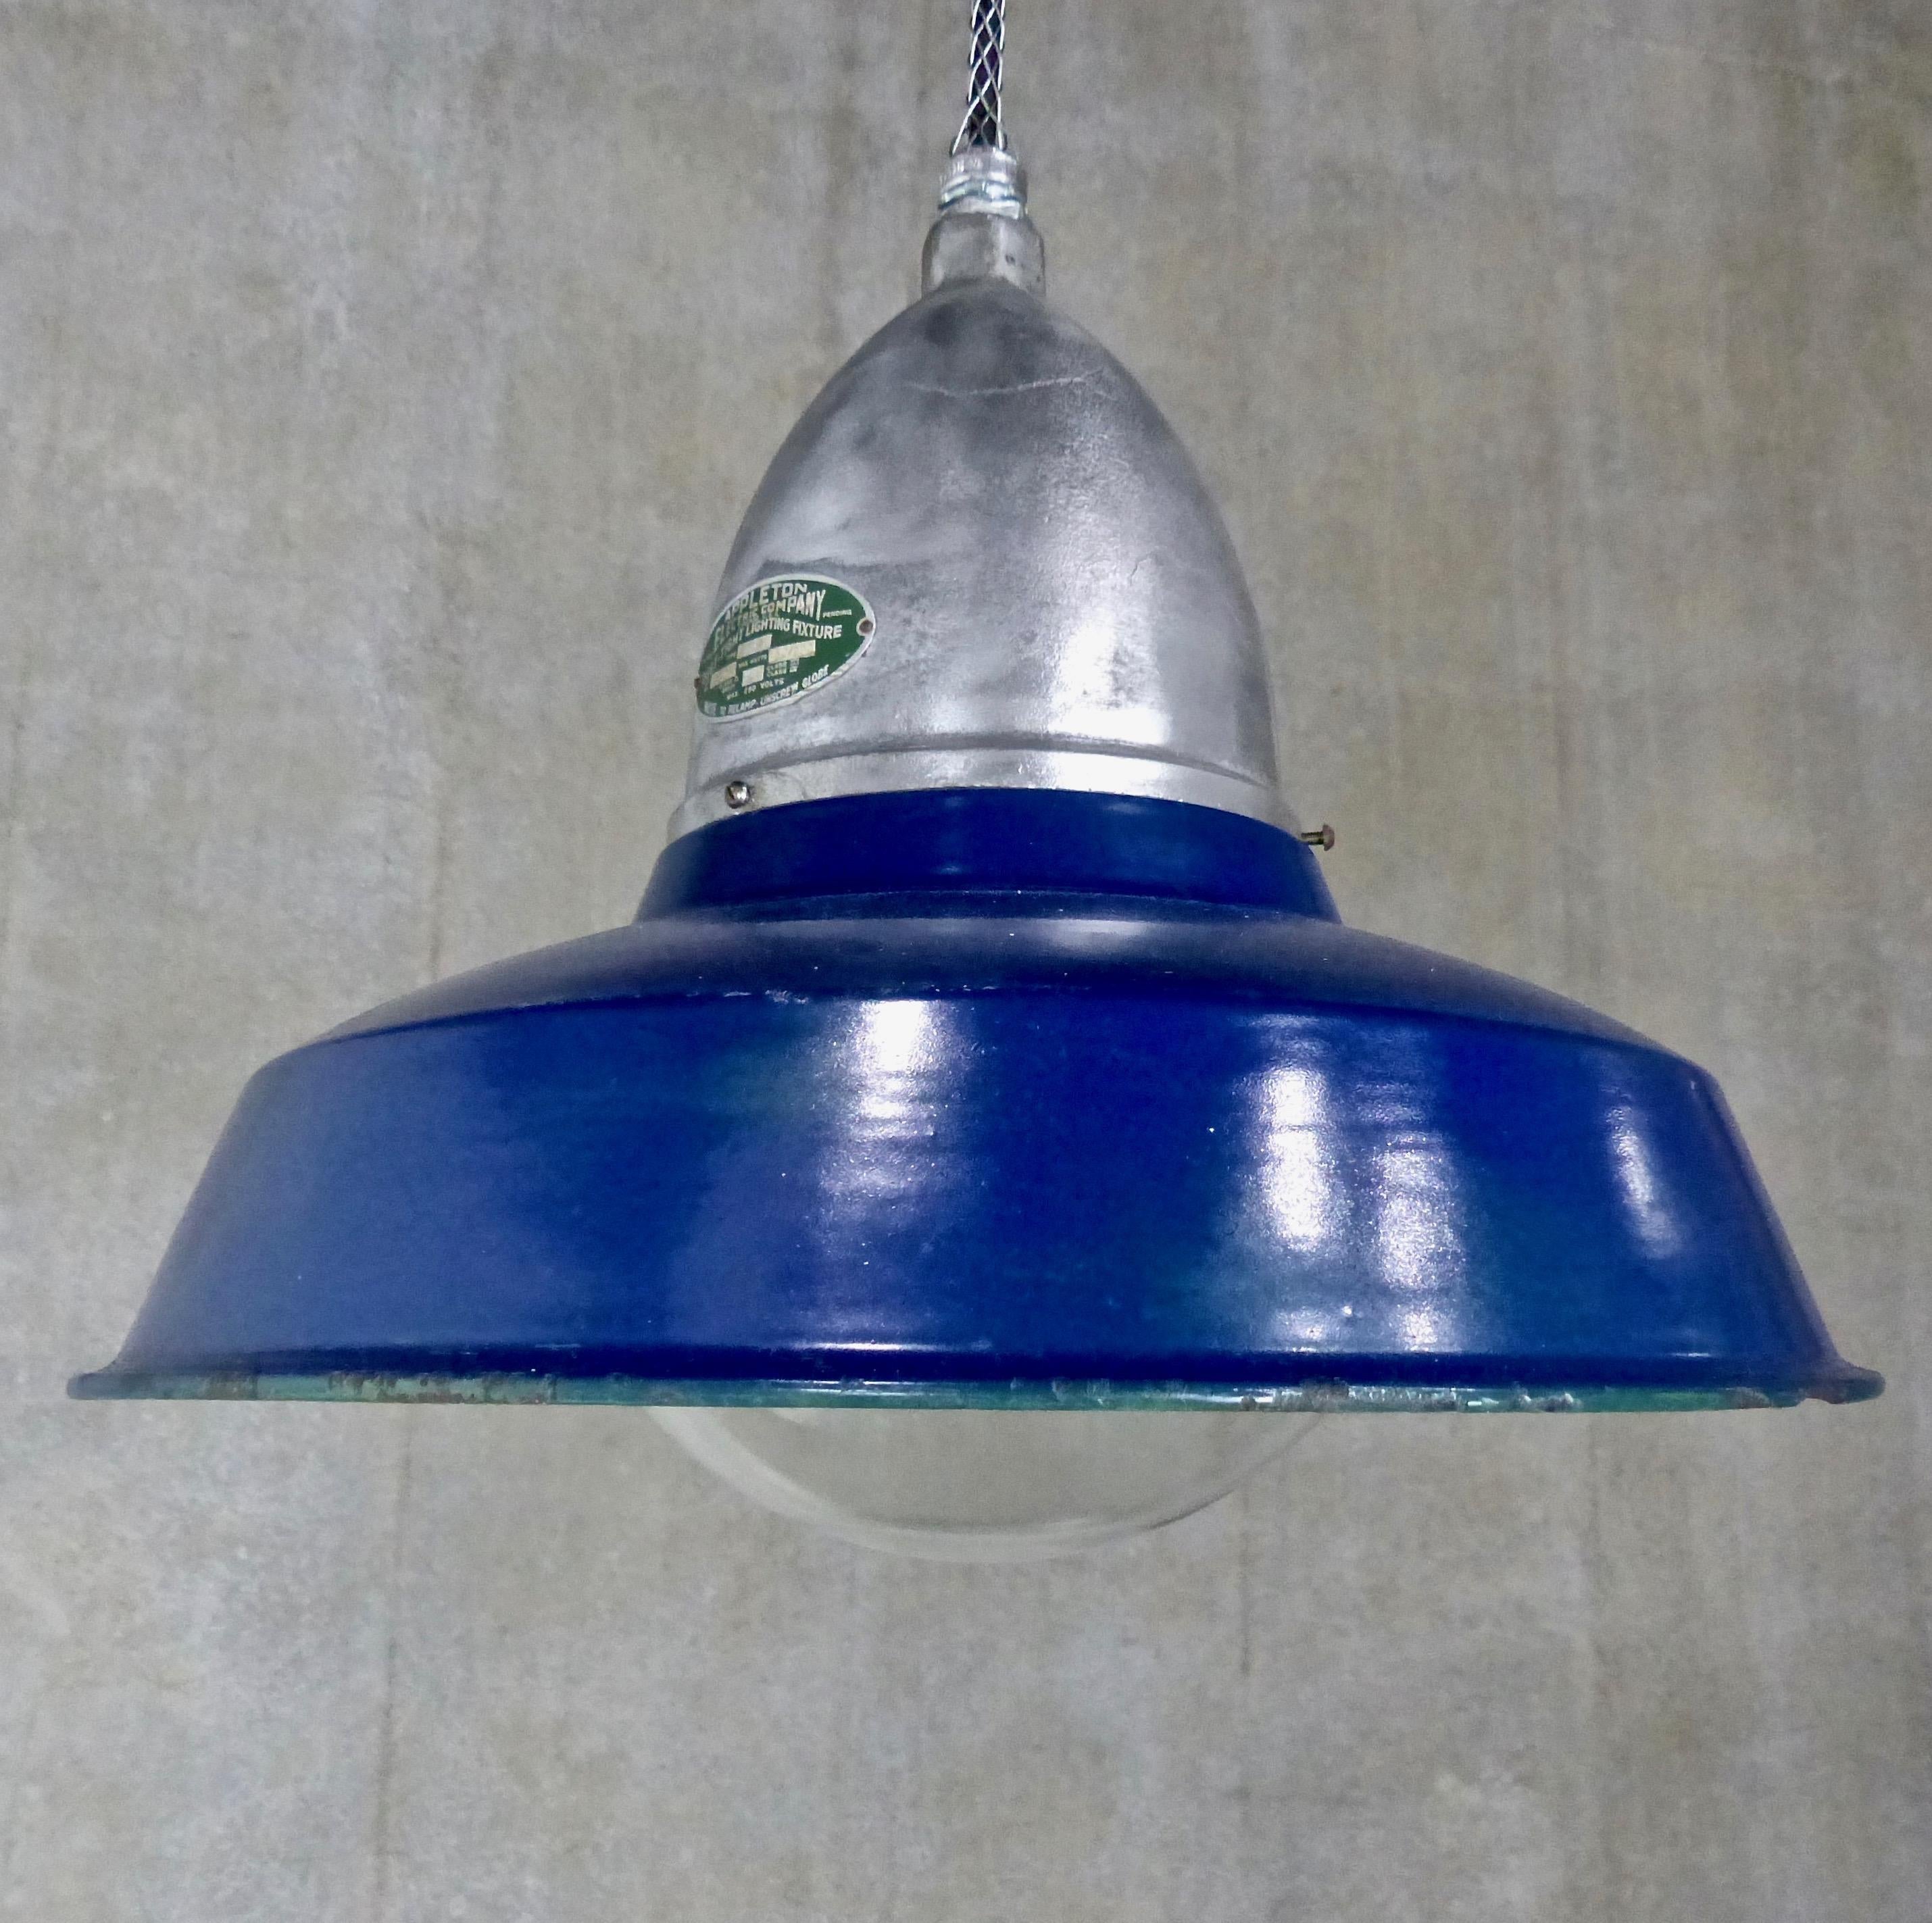 Sought-after Industrial/factory pendant lights with cast metal housings and ‘explosion proof’ glass globes. With rare, original cobalt blue enamel shades. Produced and signed by the Appleton Electric Company, Chicago, IL, circa 1930. Re-wired and